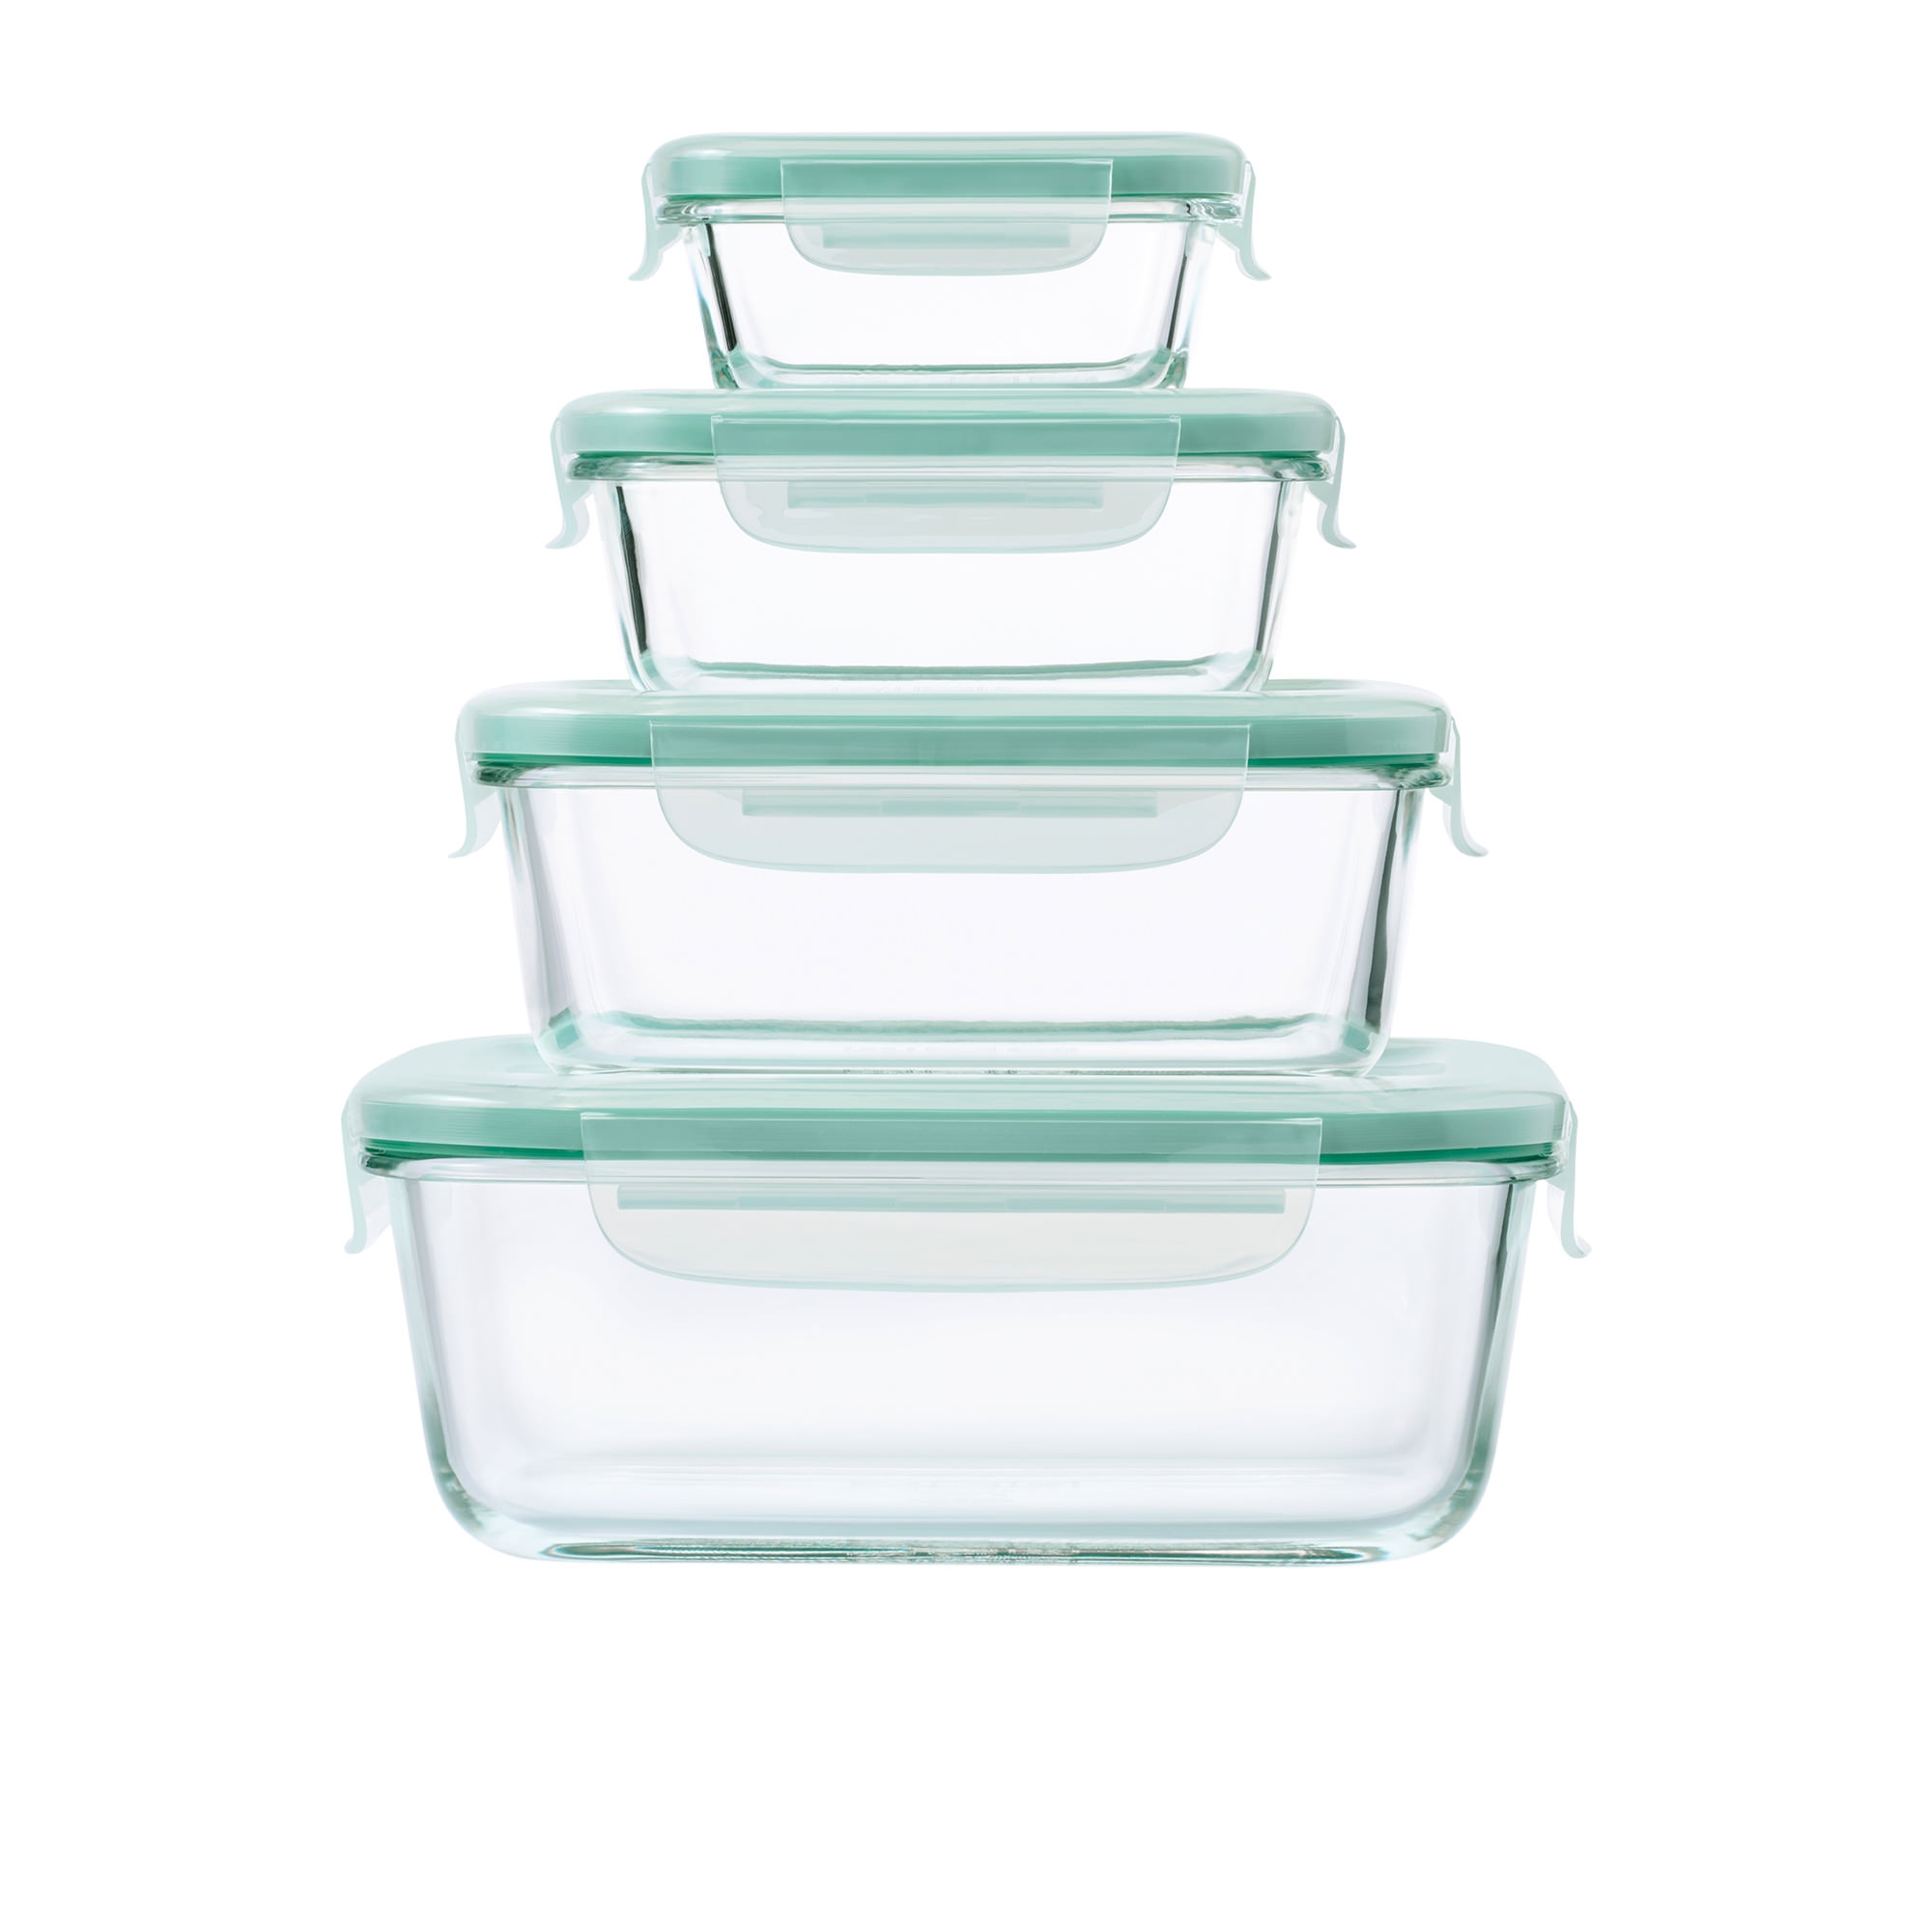 OXO Good Grips Smart Seal Rectangular Glass Container Set 4pc Image 1